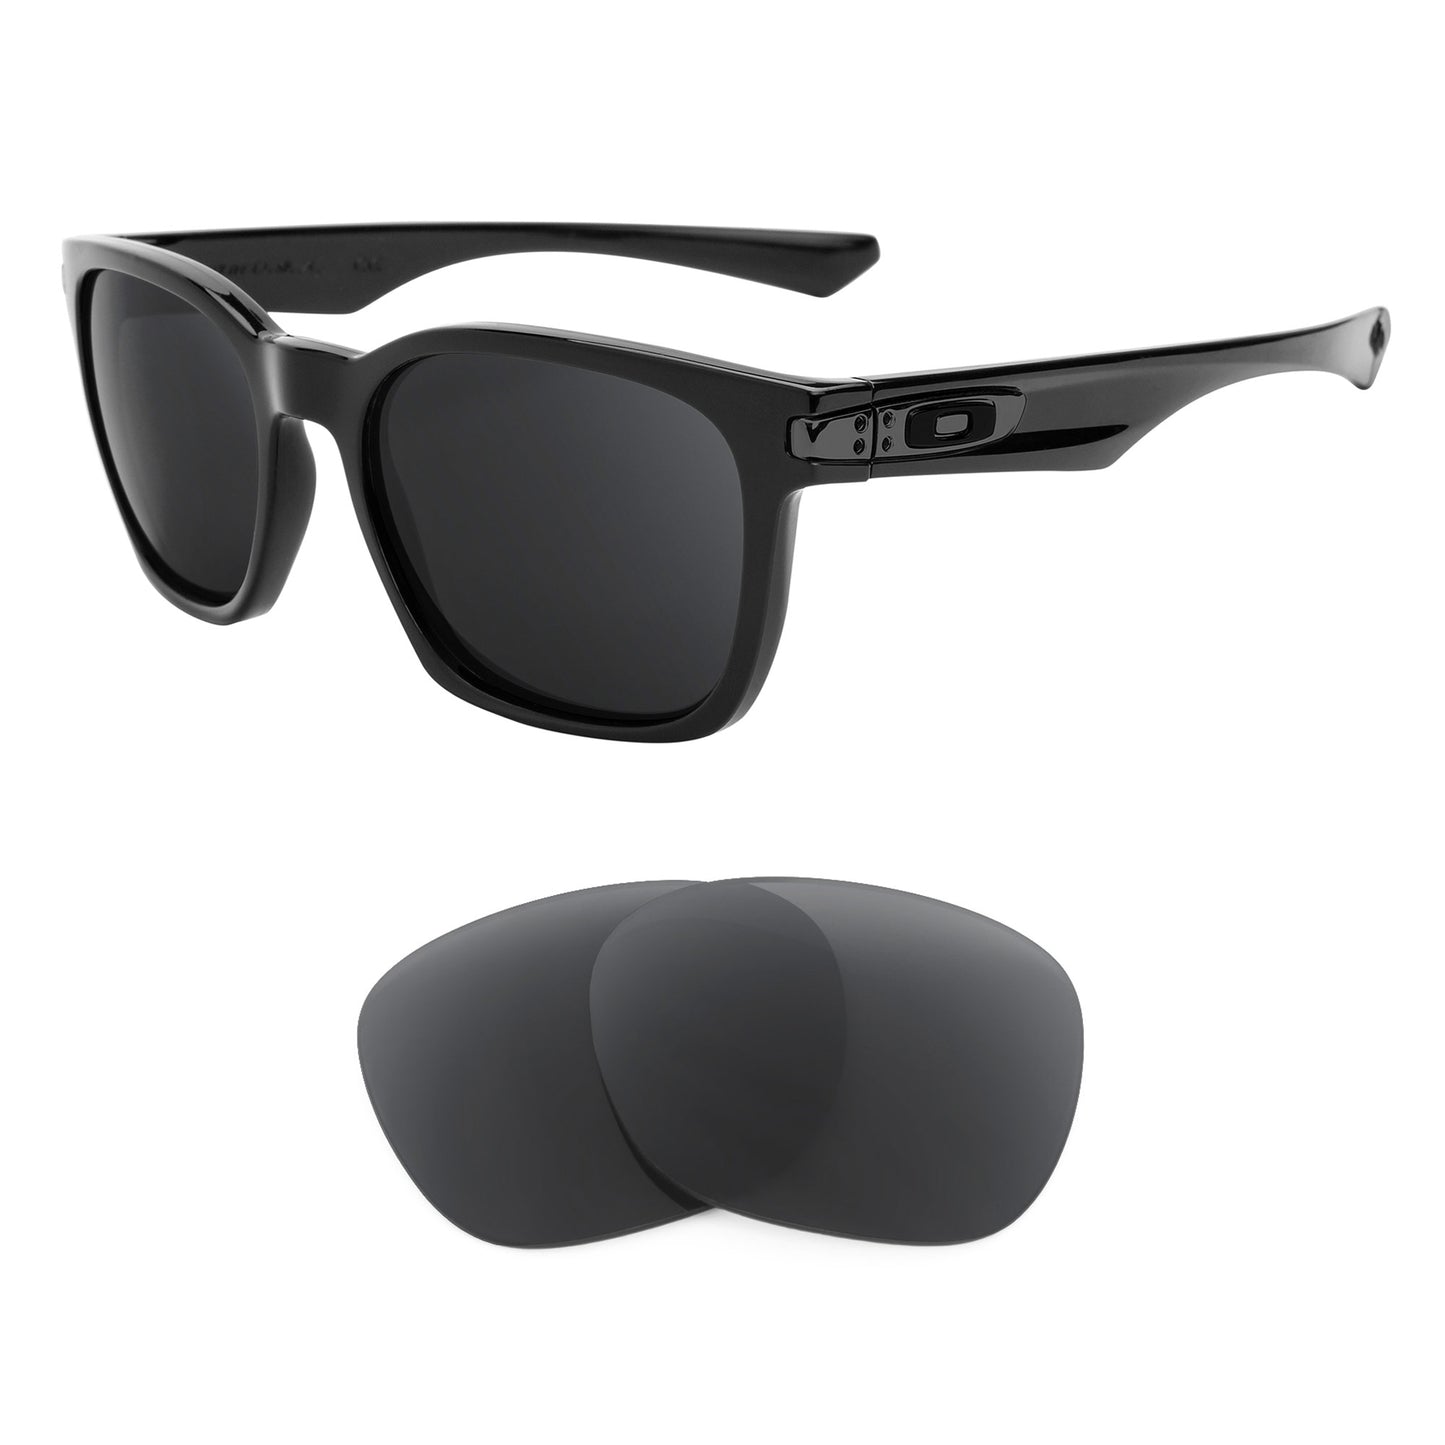 Oakley Garage Rock sunglasses with replacement lenses